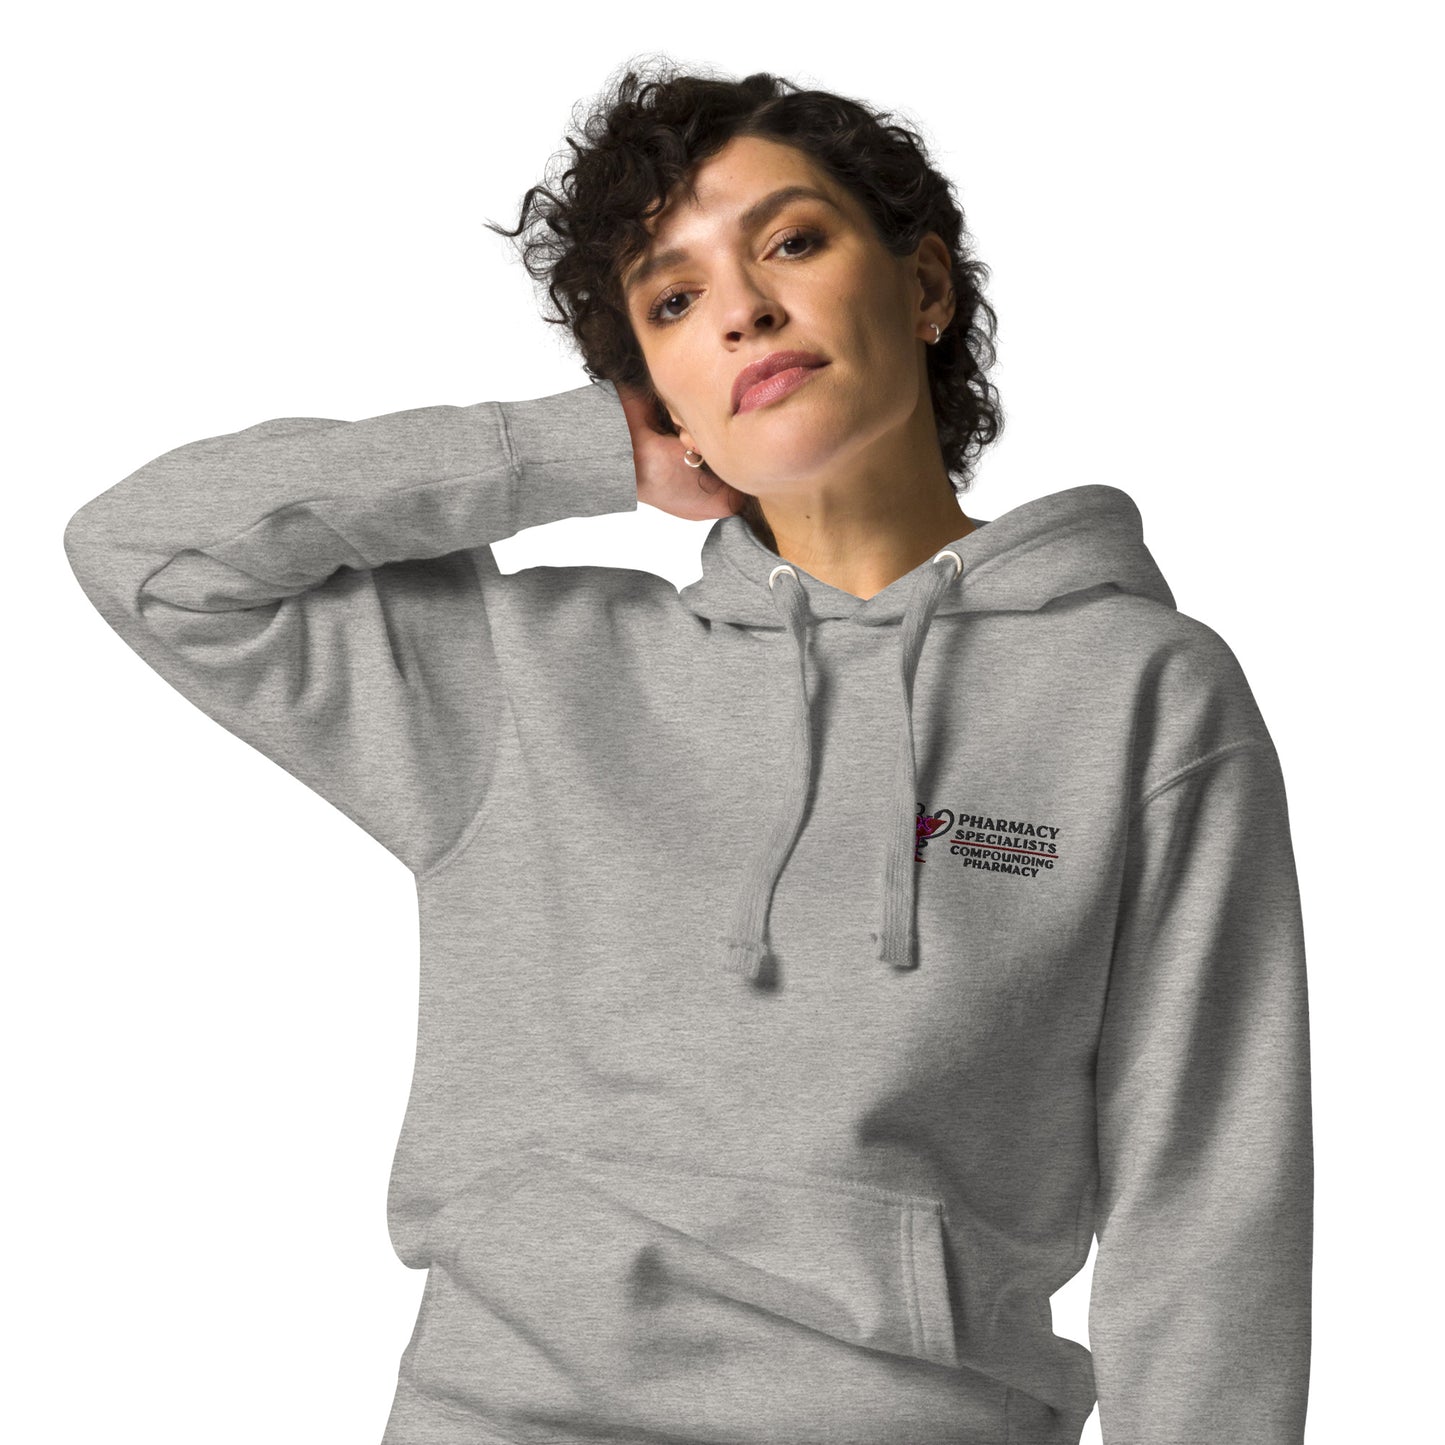 Unisex Premium Hoodie (fitted cut) - Pharmacy Specialists